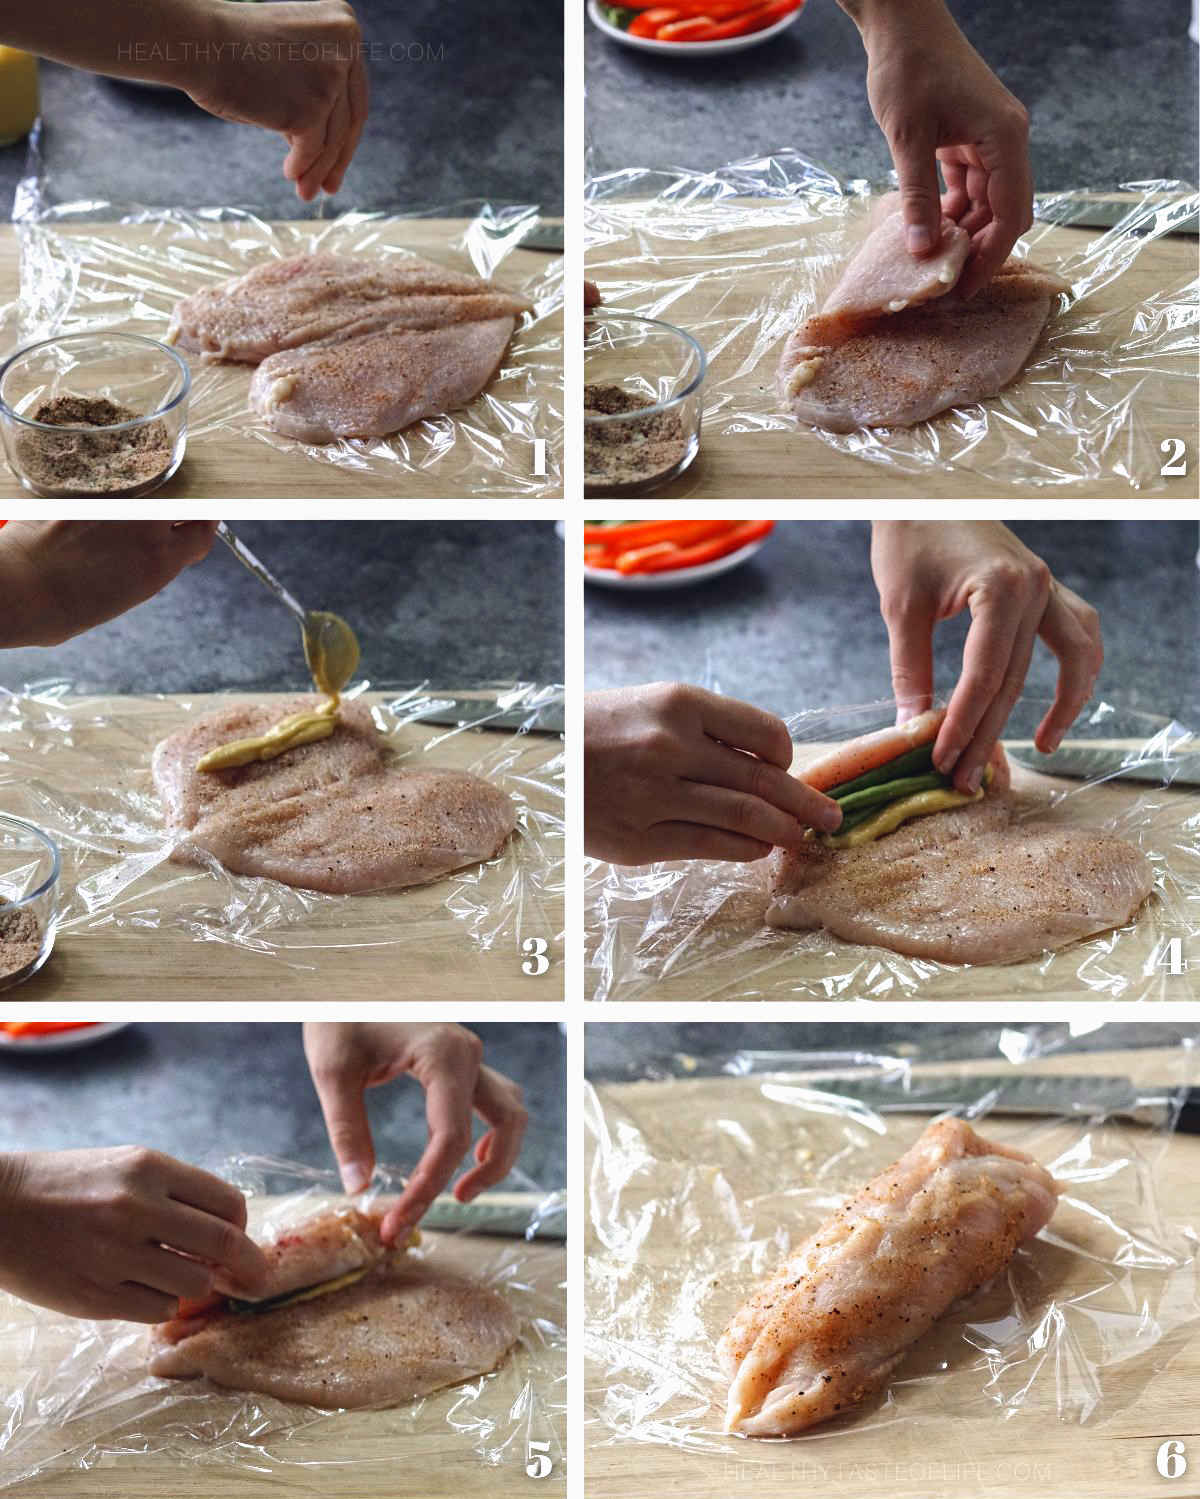 Process shots showing steps on how to season the pounded chicken, stuff it and roll it up.